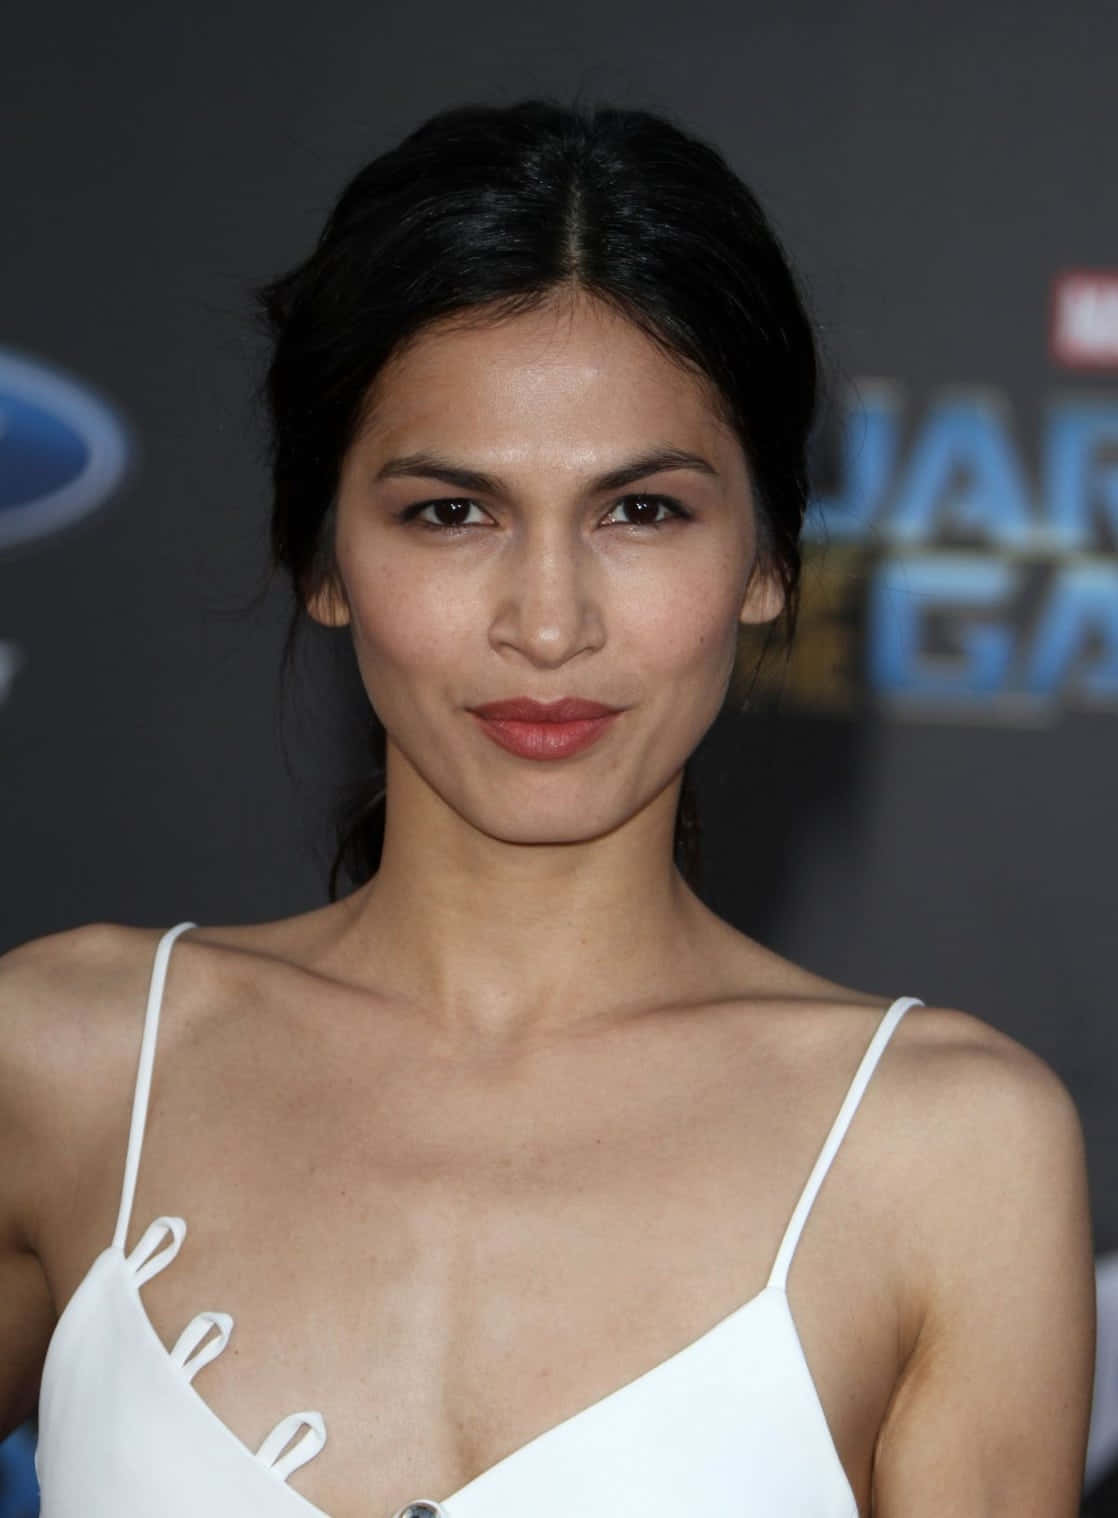 Elodie Yung looking fierce and determined Wallpaper